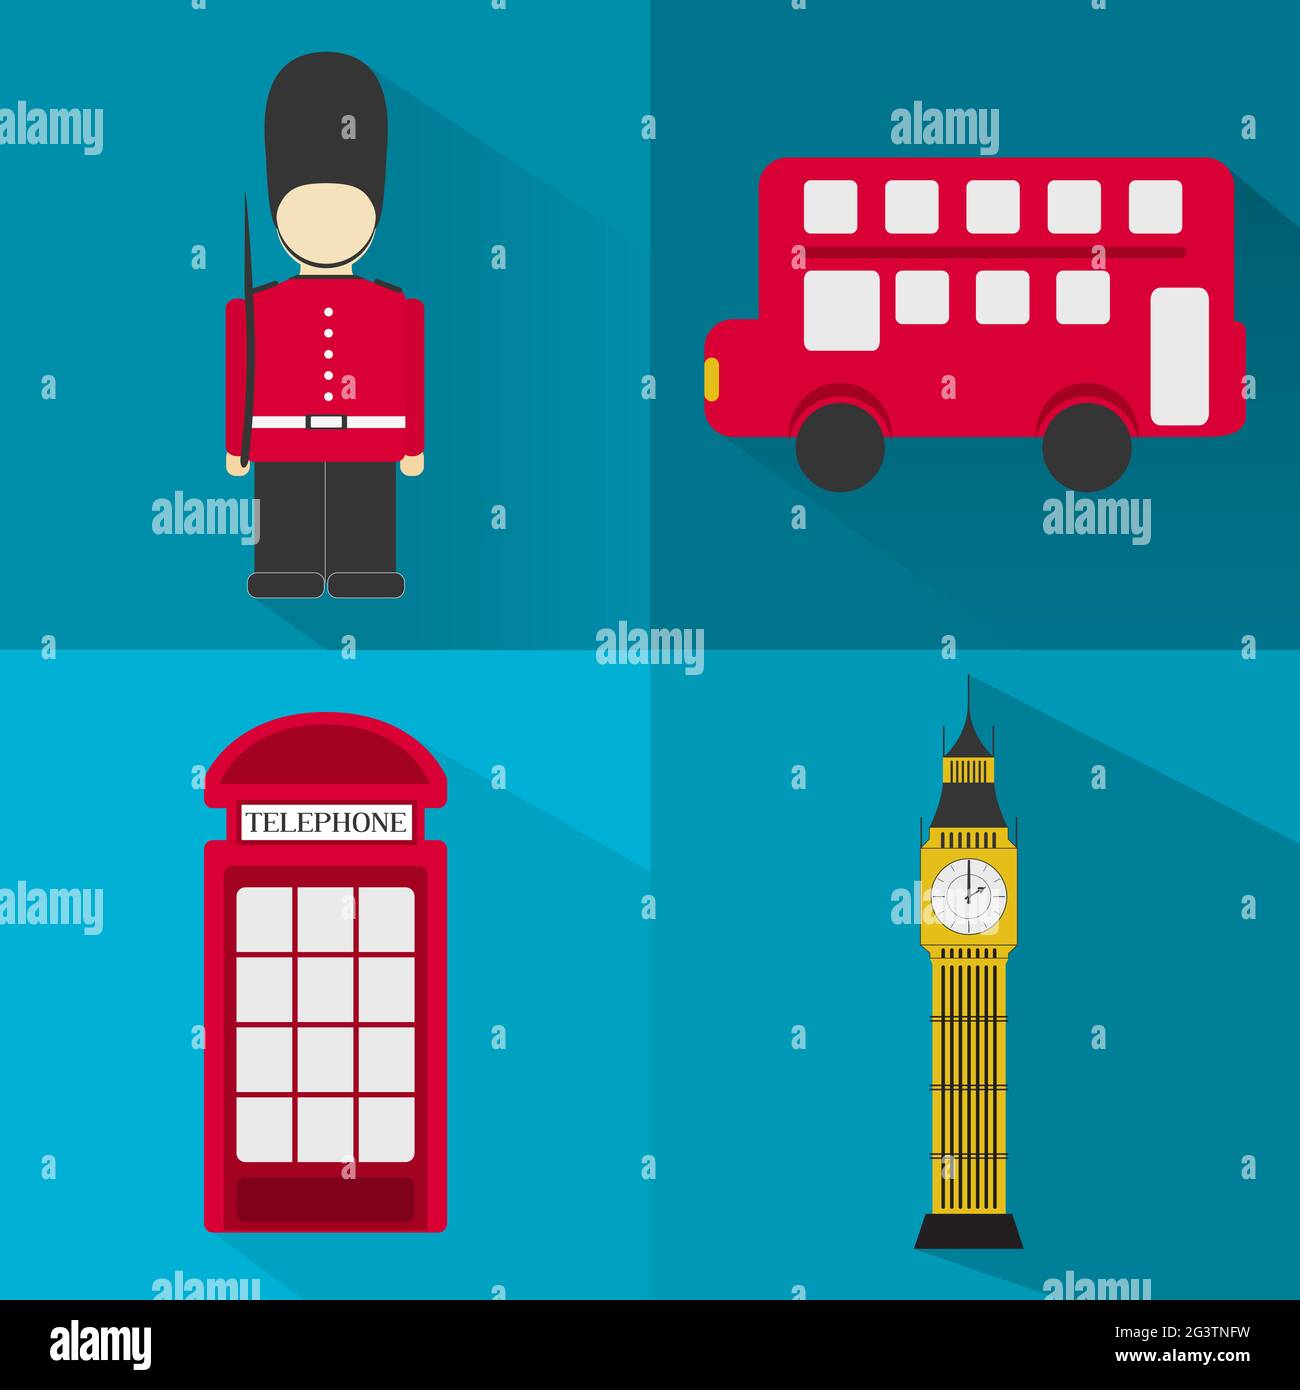 Four symbols of London´s city - london soldier, bus, big ben, phone booth. Flat design. Long shadow. Stock Vector